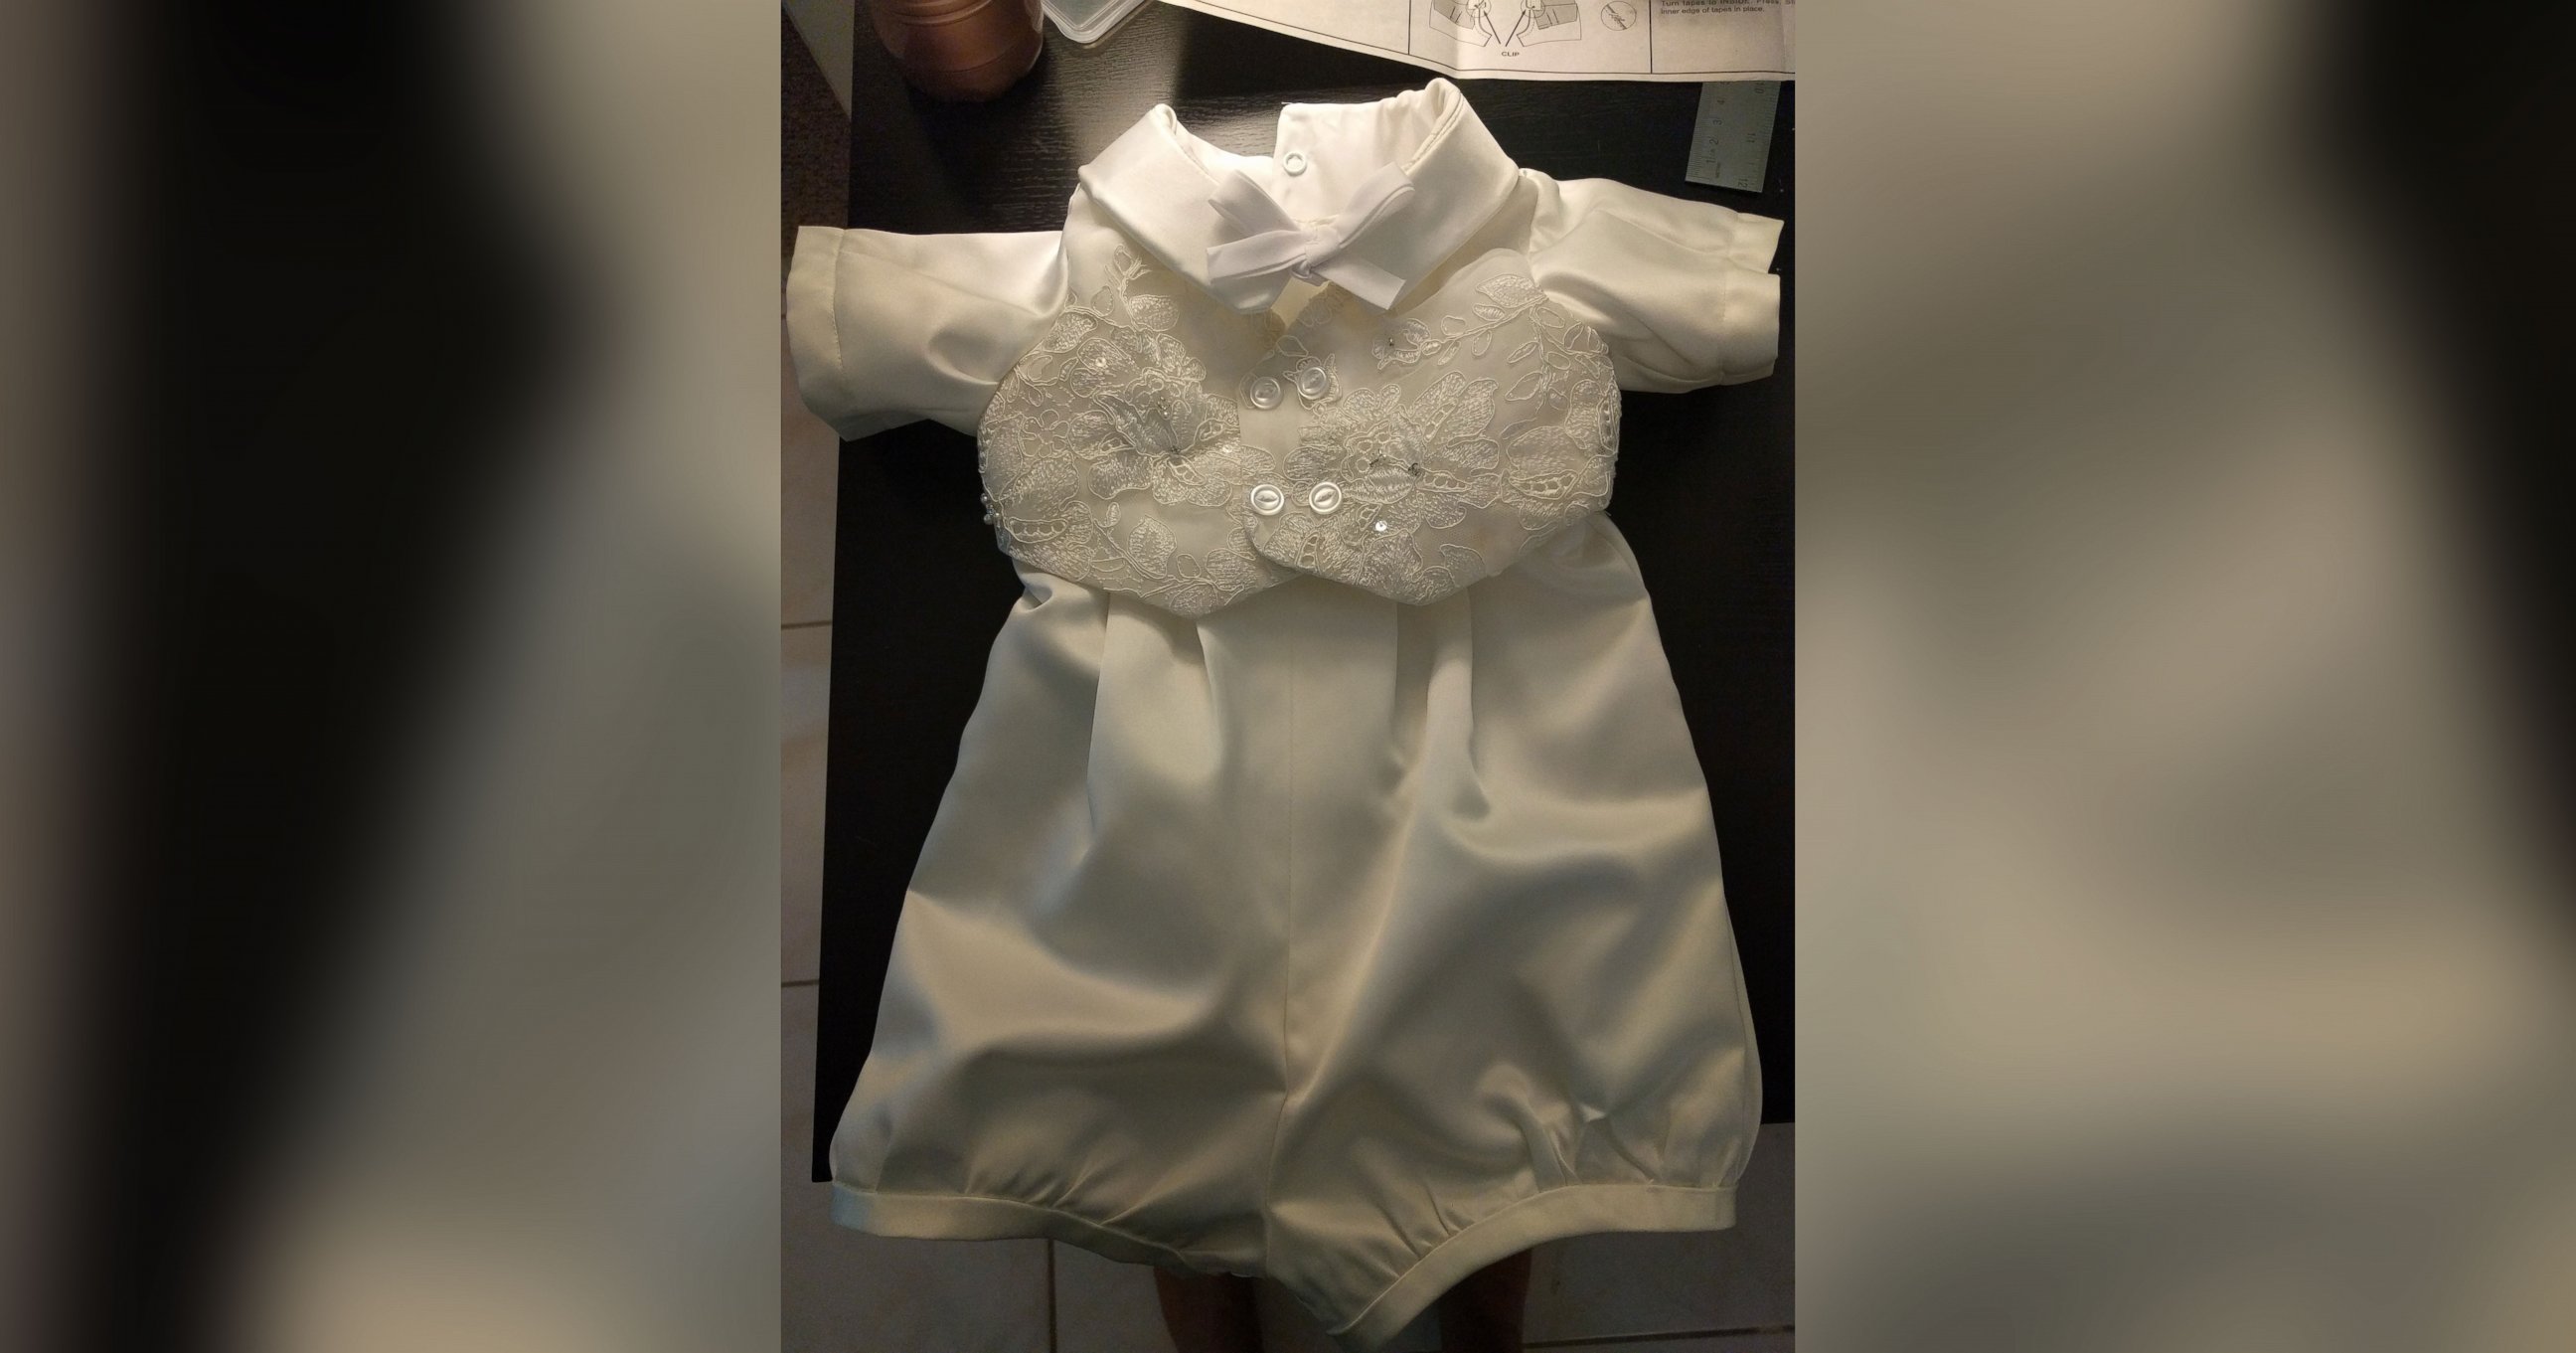 PHOTO: Emily Walsh turned her friend Shayna Sexton's 2010 wedding gown into a baptism outfit for Sexton's firstborn son, Bennett.